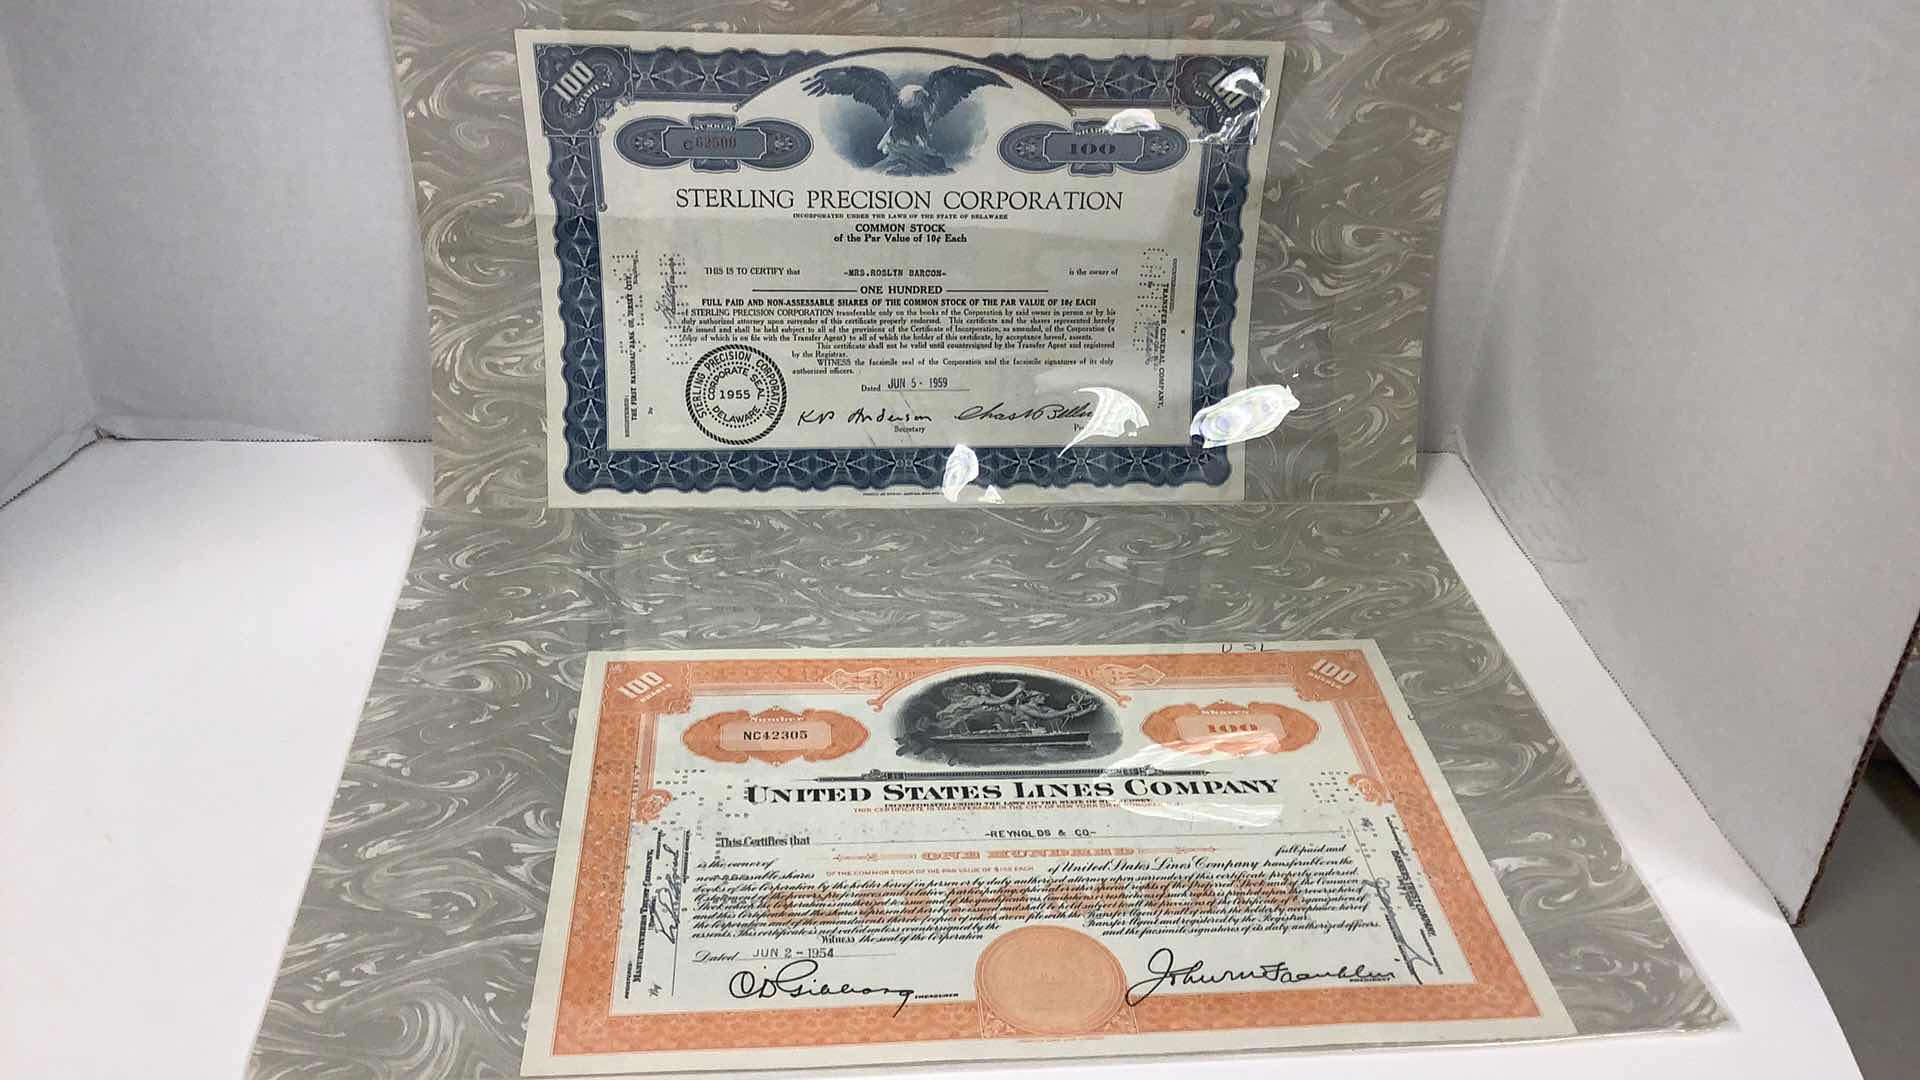 Photo 1 of FRANKLIN MINT, UNITED STATES LINES AND STERLING PRECISION CORPORATION 100 SHARES